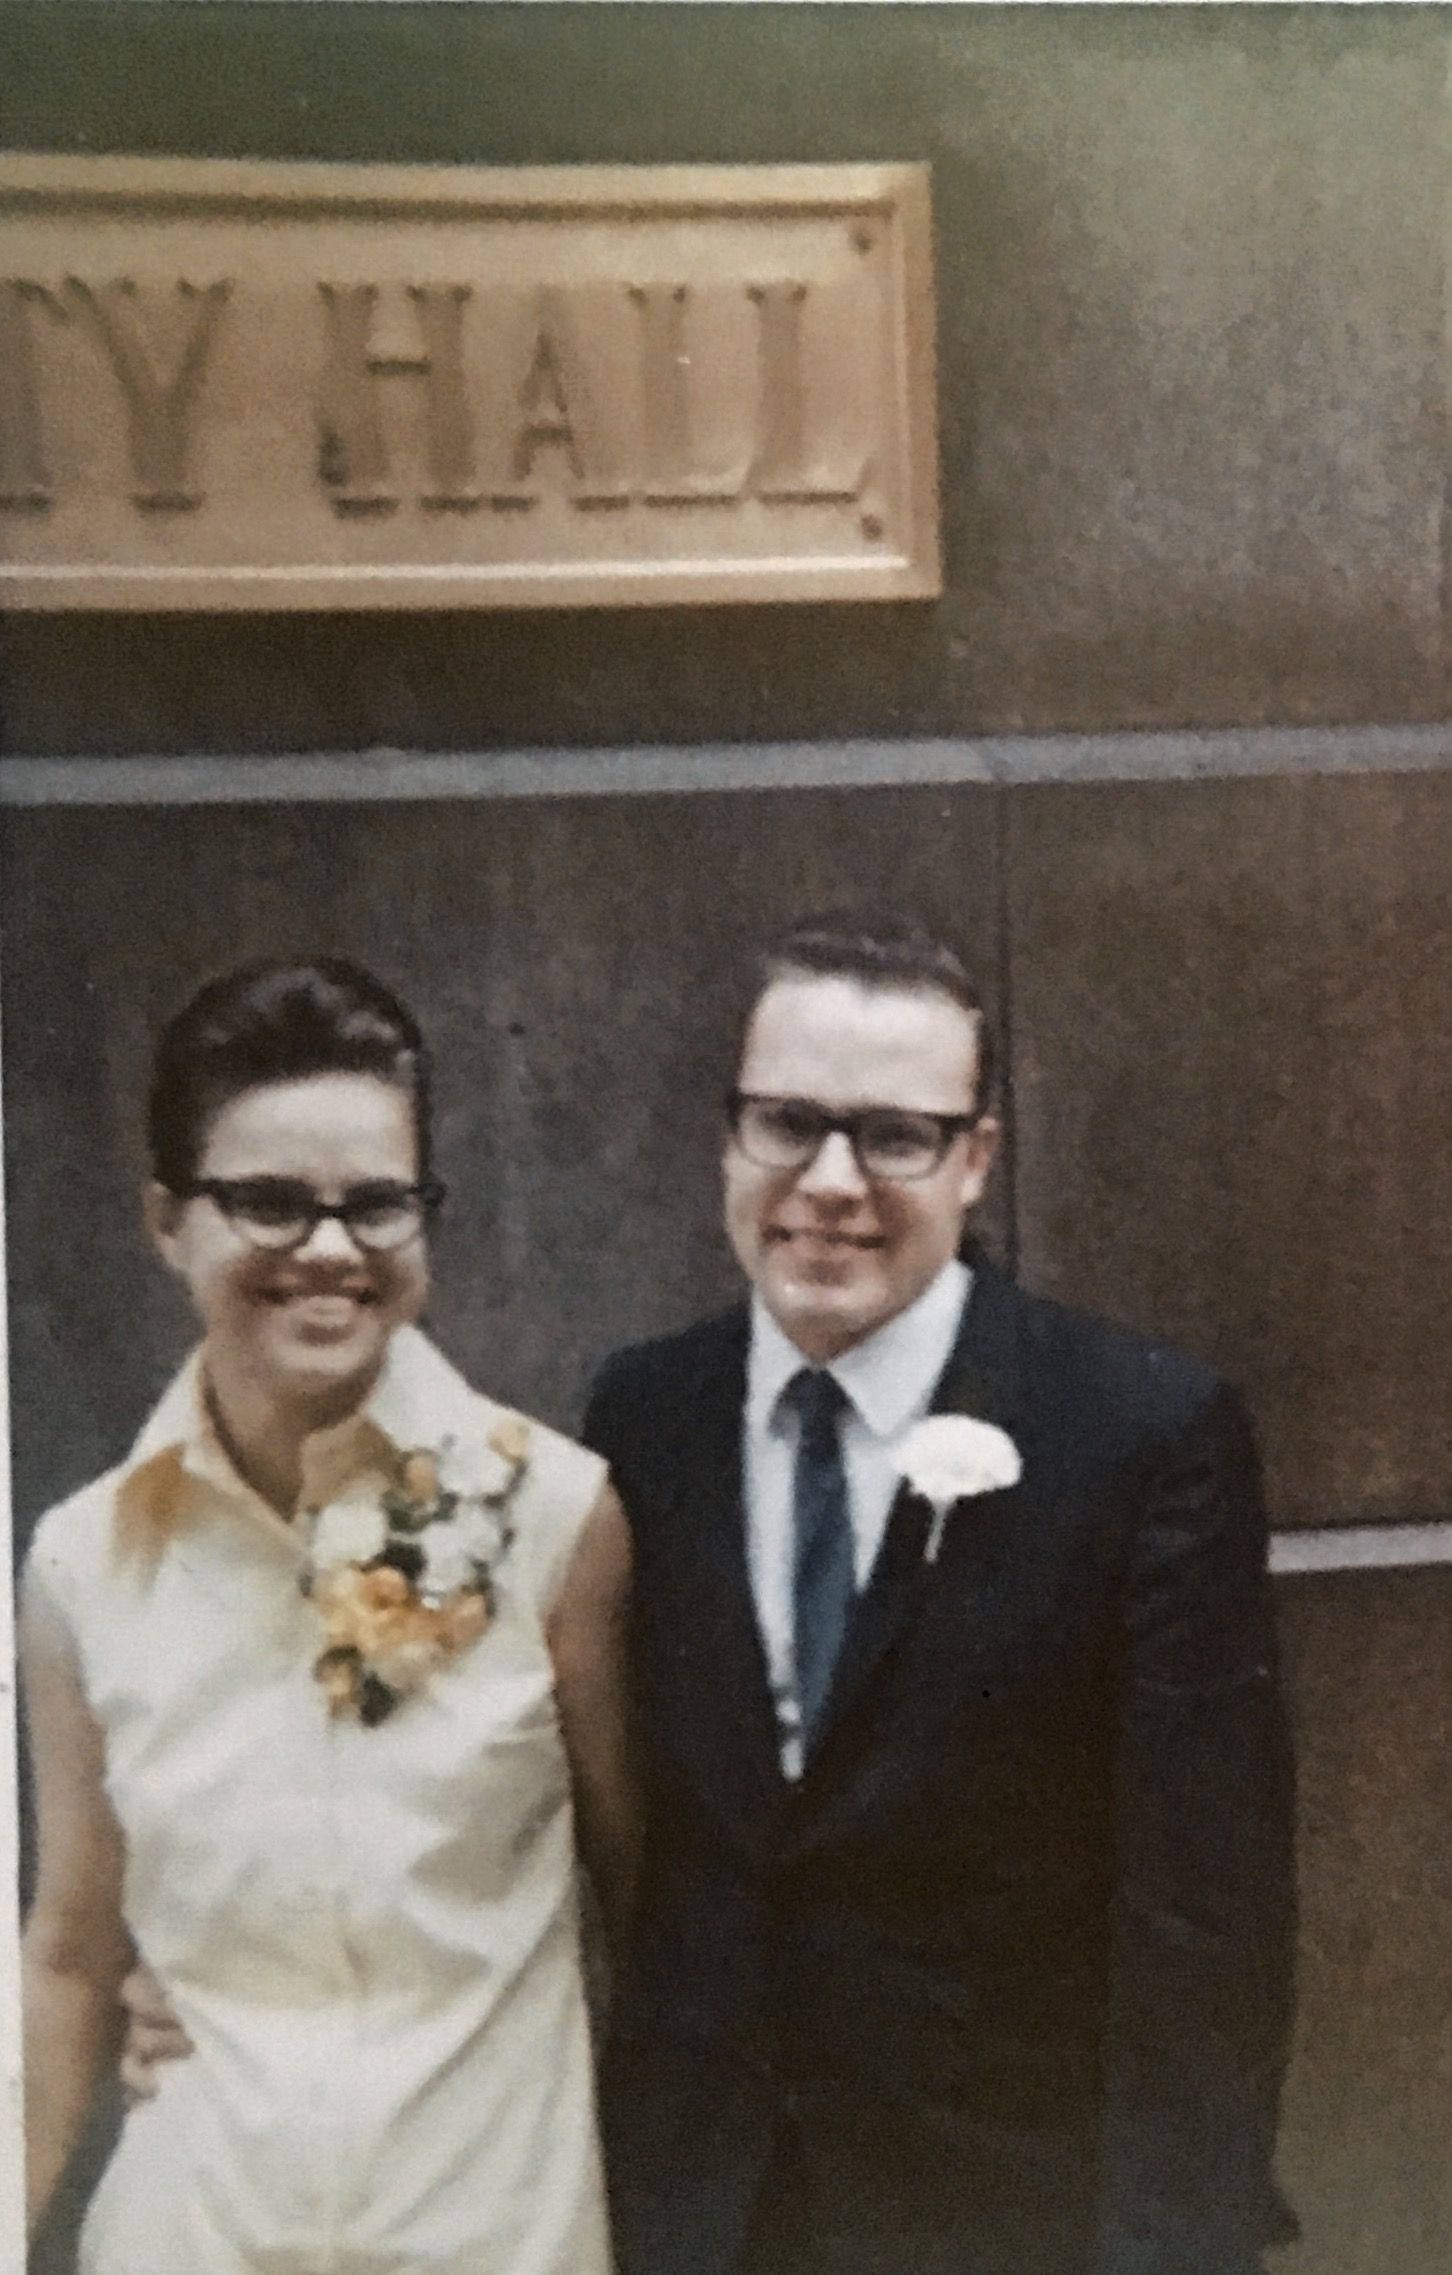 Merrill and Connie Wedding 1968
